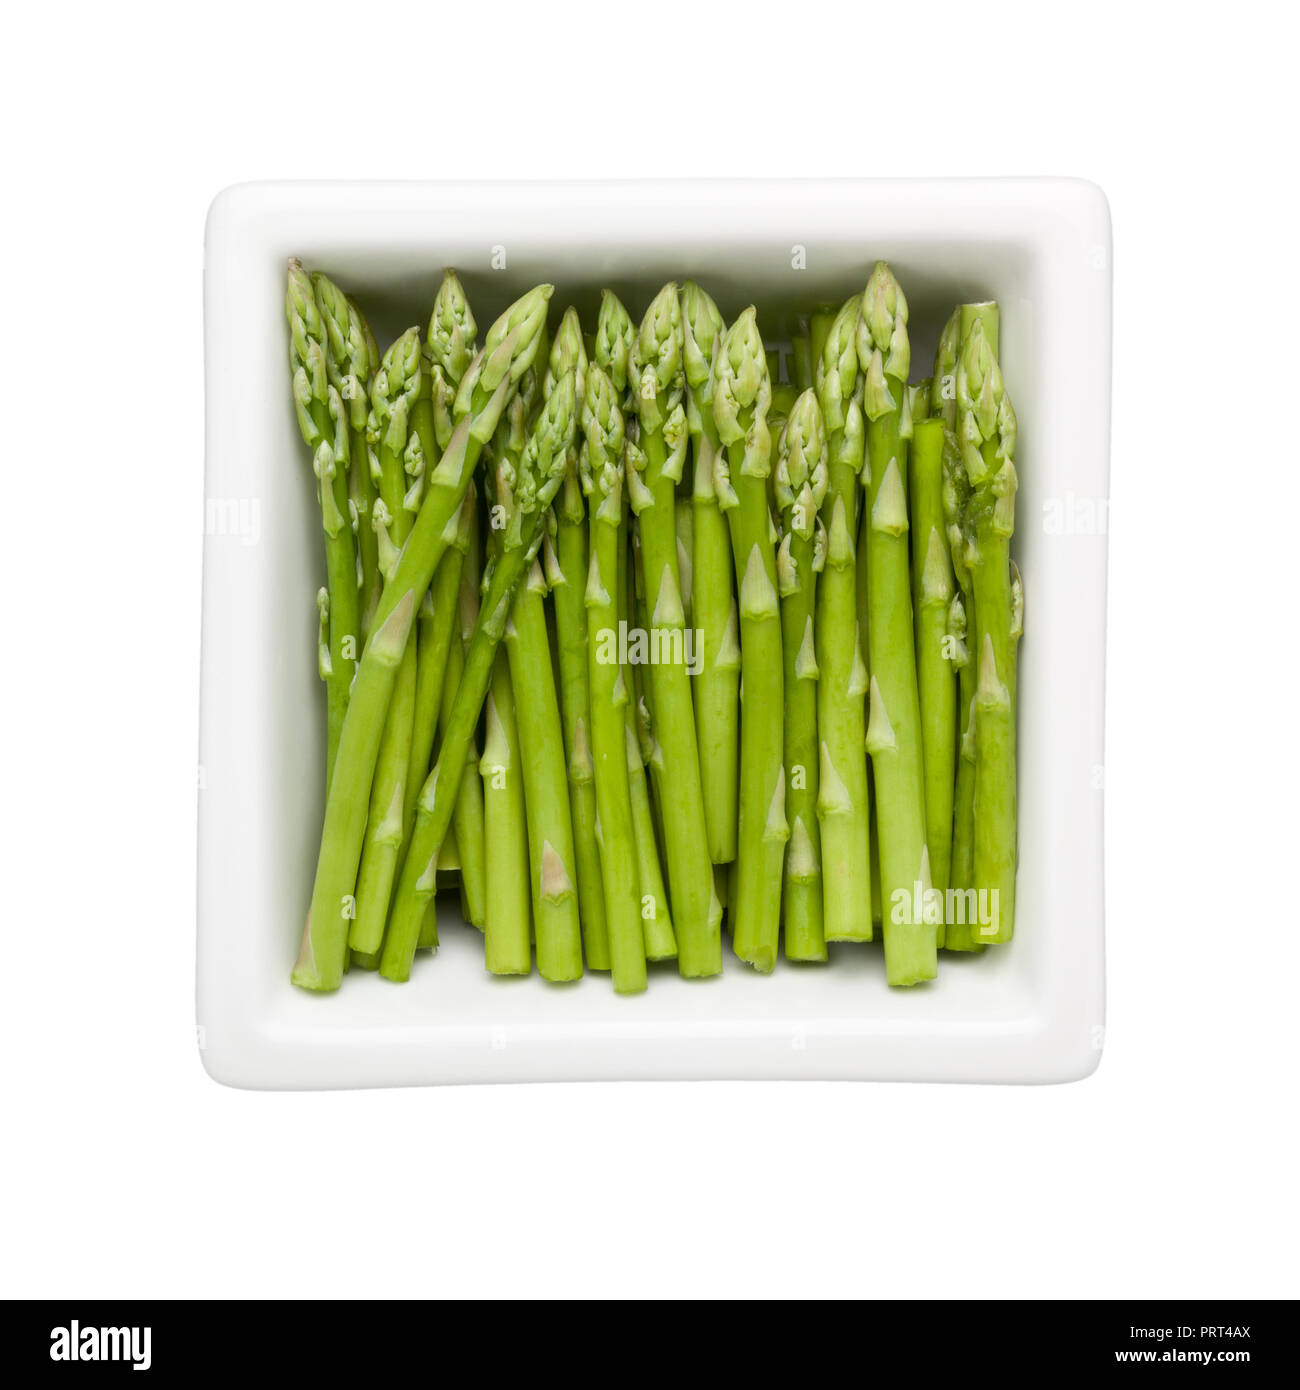 Pieces of asparagus in a square bowl isolated on white background; Stock Photo